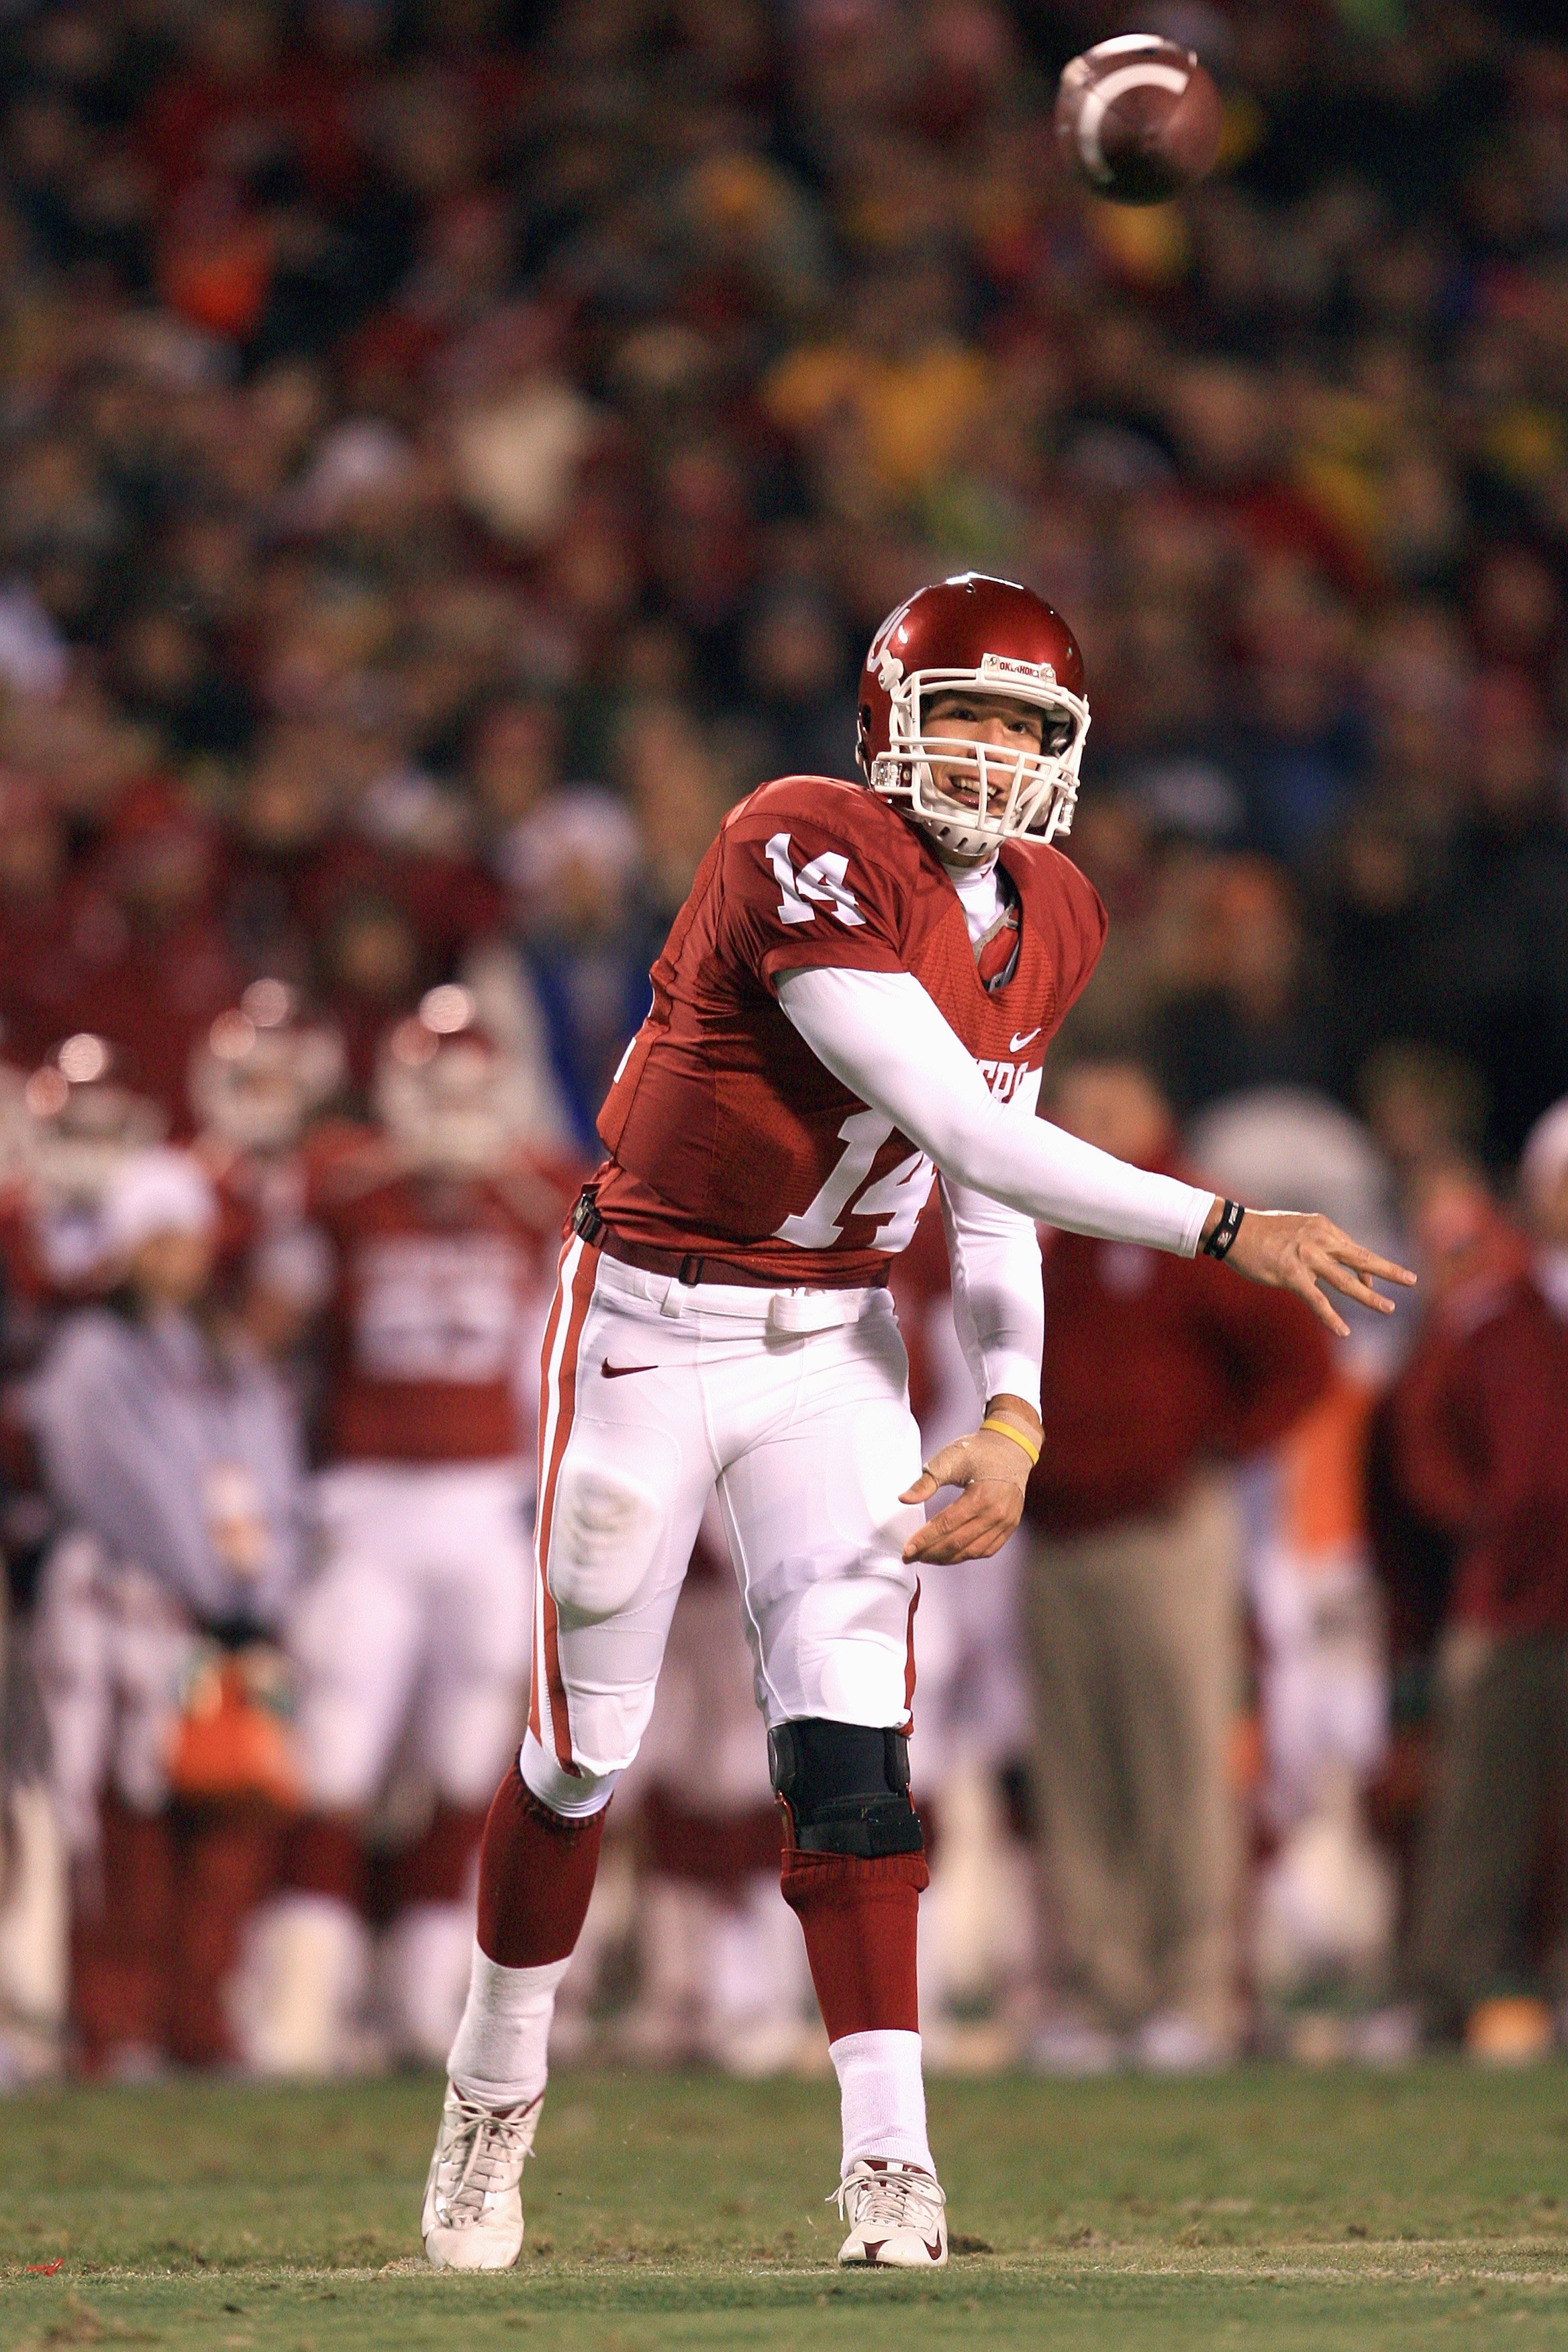 KANSAS CITY, MO - DECEMBER 06:  Quarterback Sam Bradford #14 of the Oklahoma Sooners passes the ball during the game against the Missouri Tigers on December 6, 2008 at Arrowhead Stadium in Kansas City, Missouri. (Photo by Jamie Squire/Getty Images)